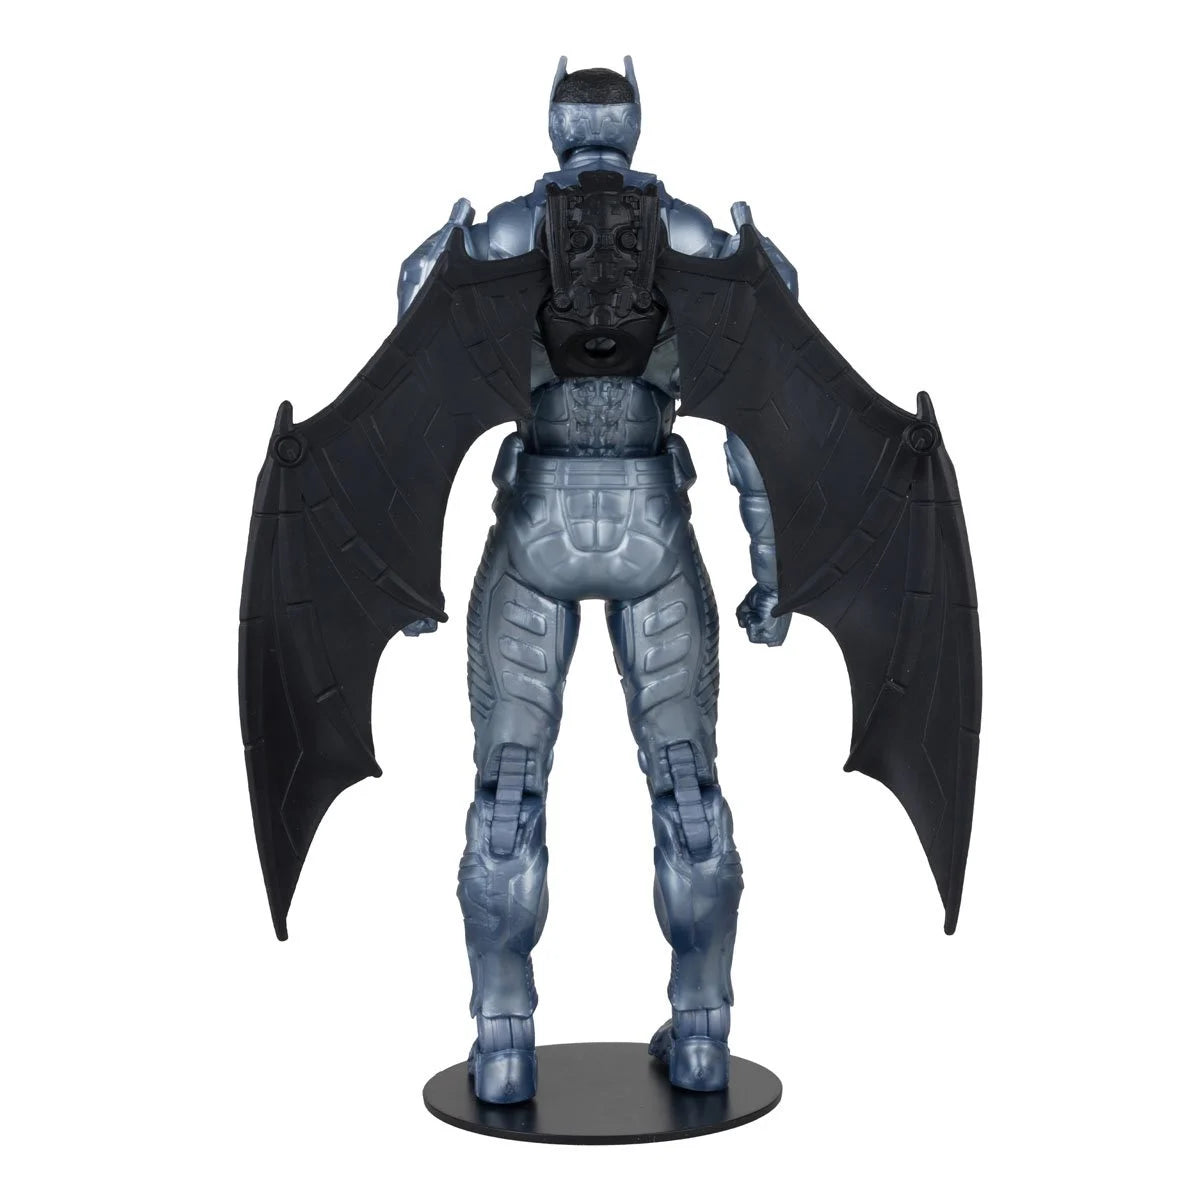 Back view of Batwing New 52 Action figure toy - Heretoserveyou